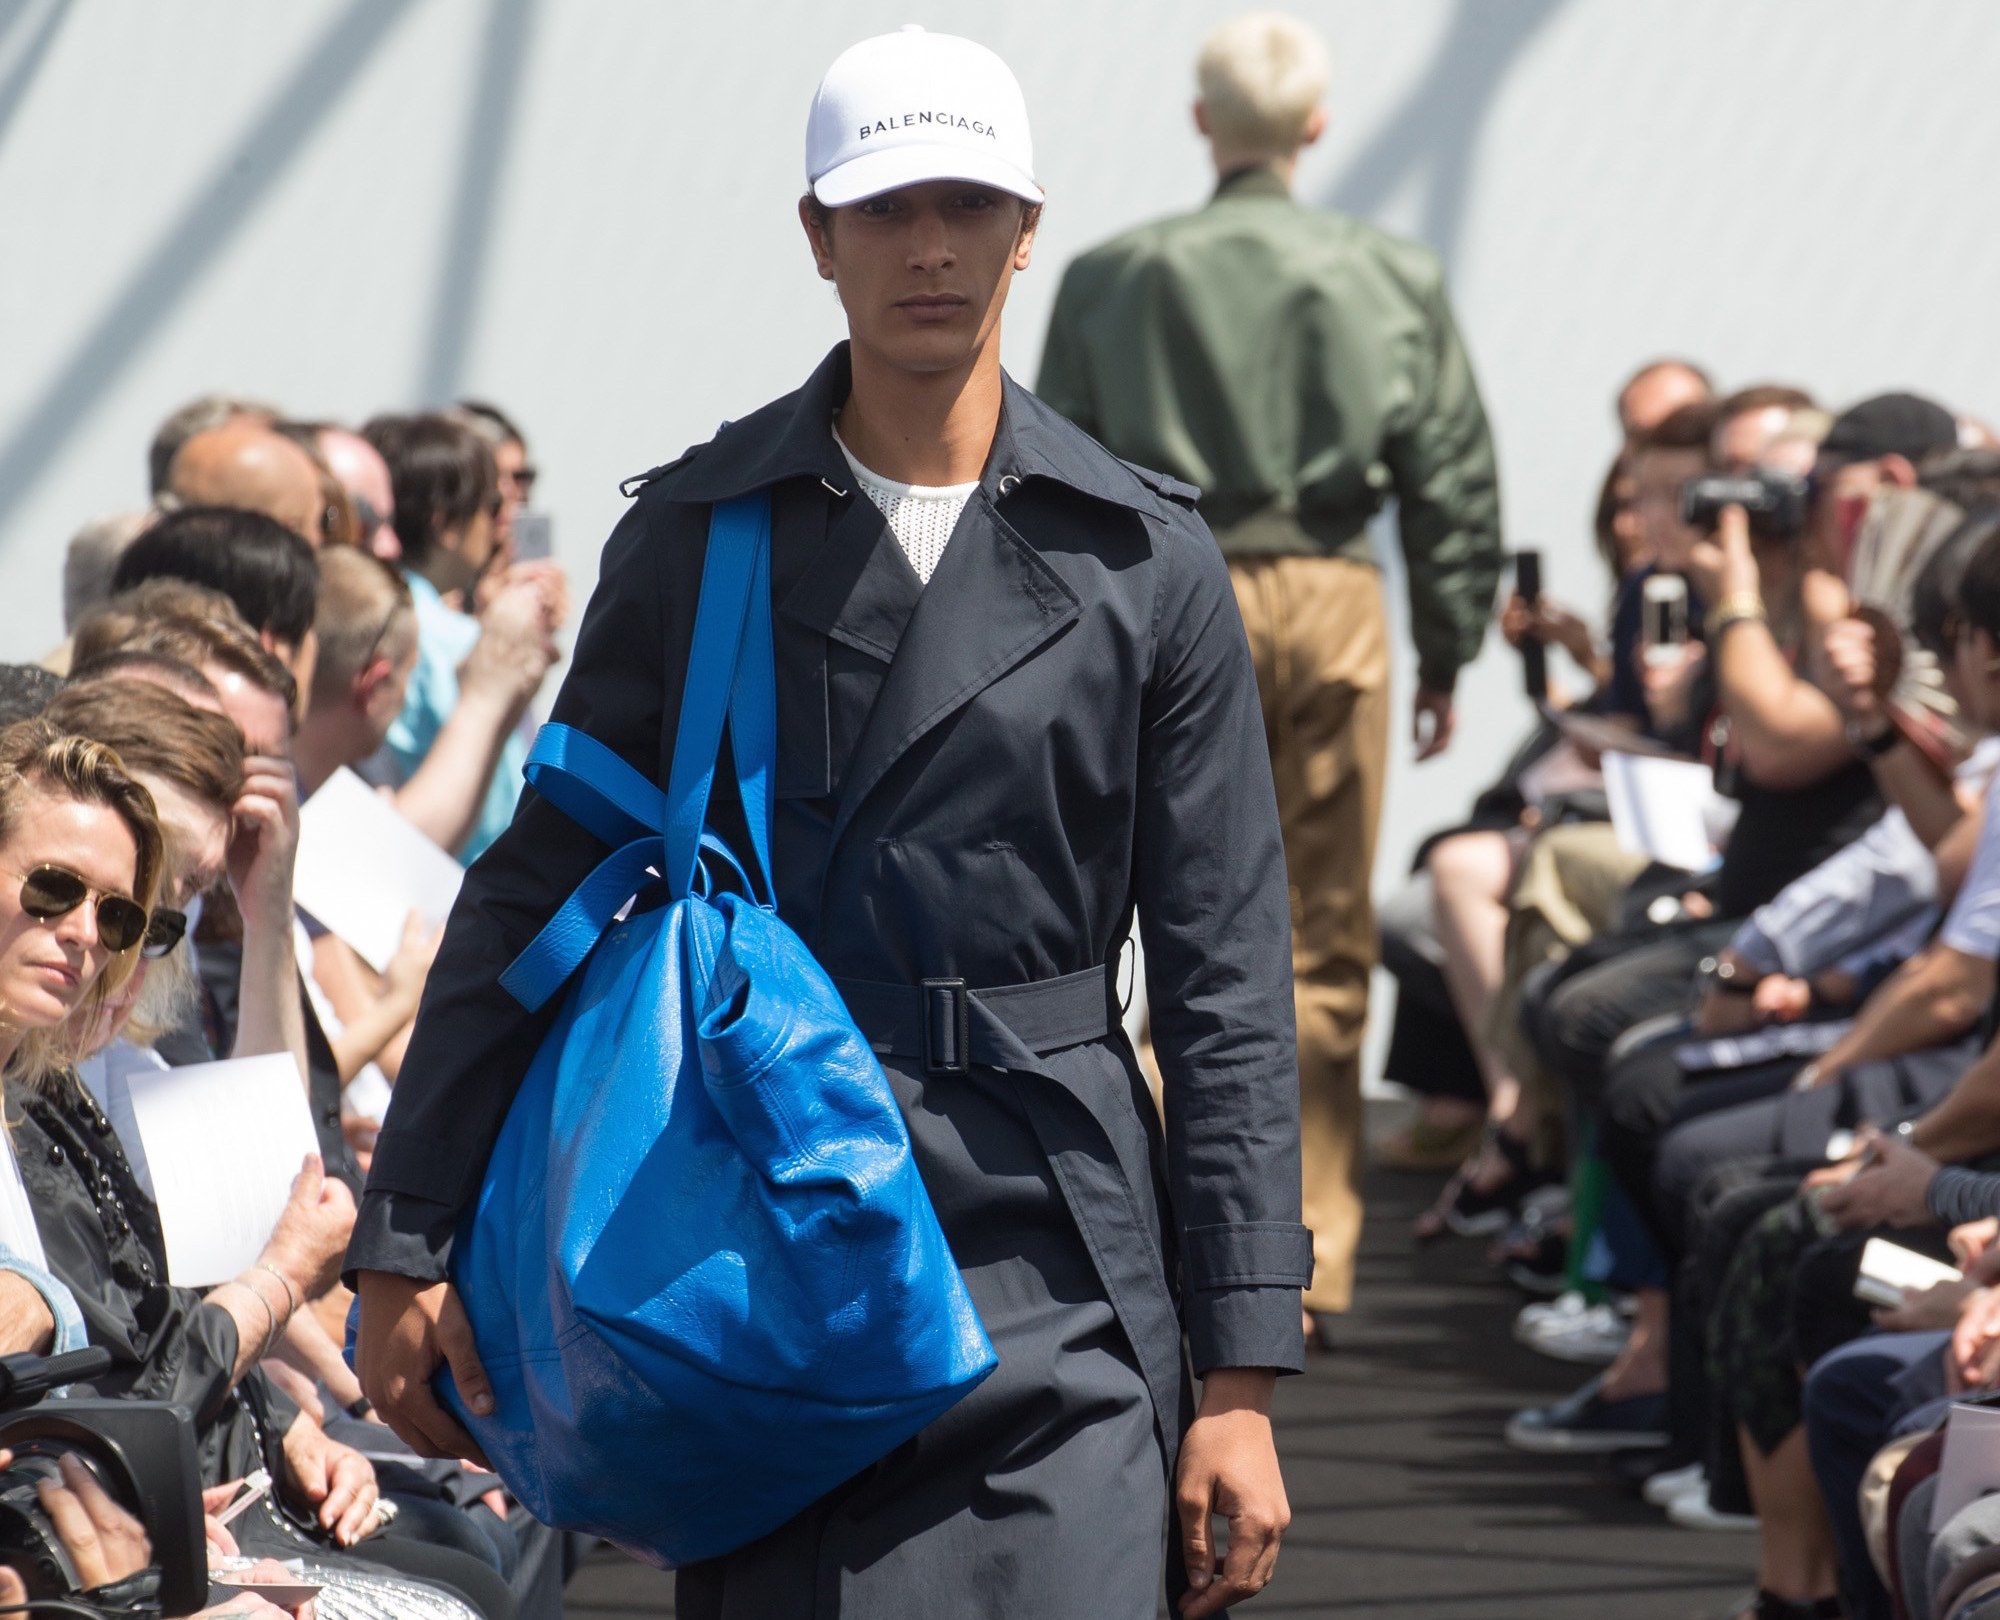 Balenciaga releases its Trash Pouch inspired by garbage bags